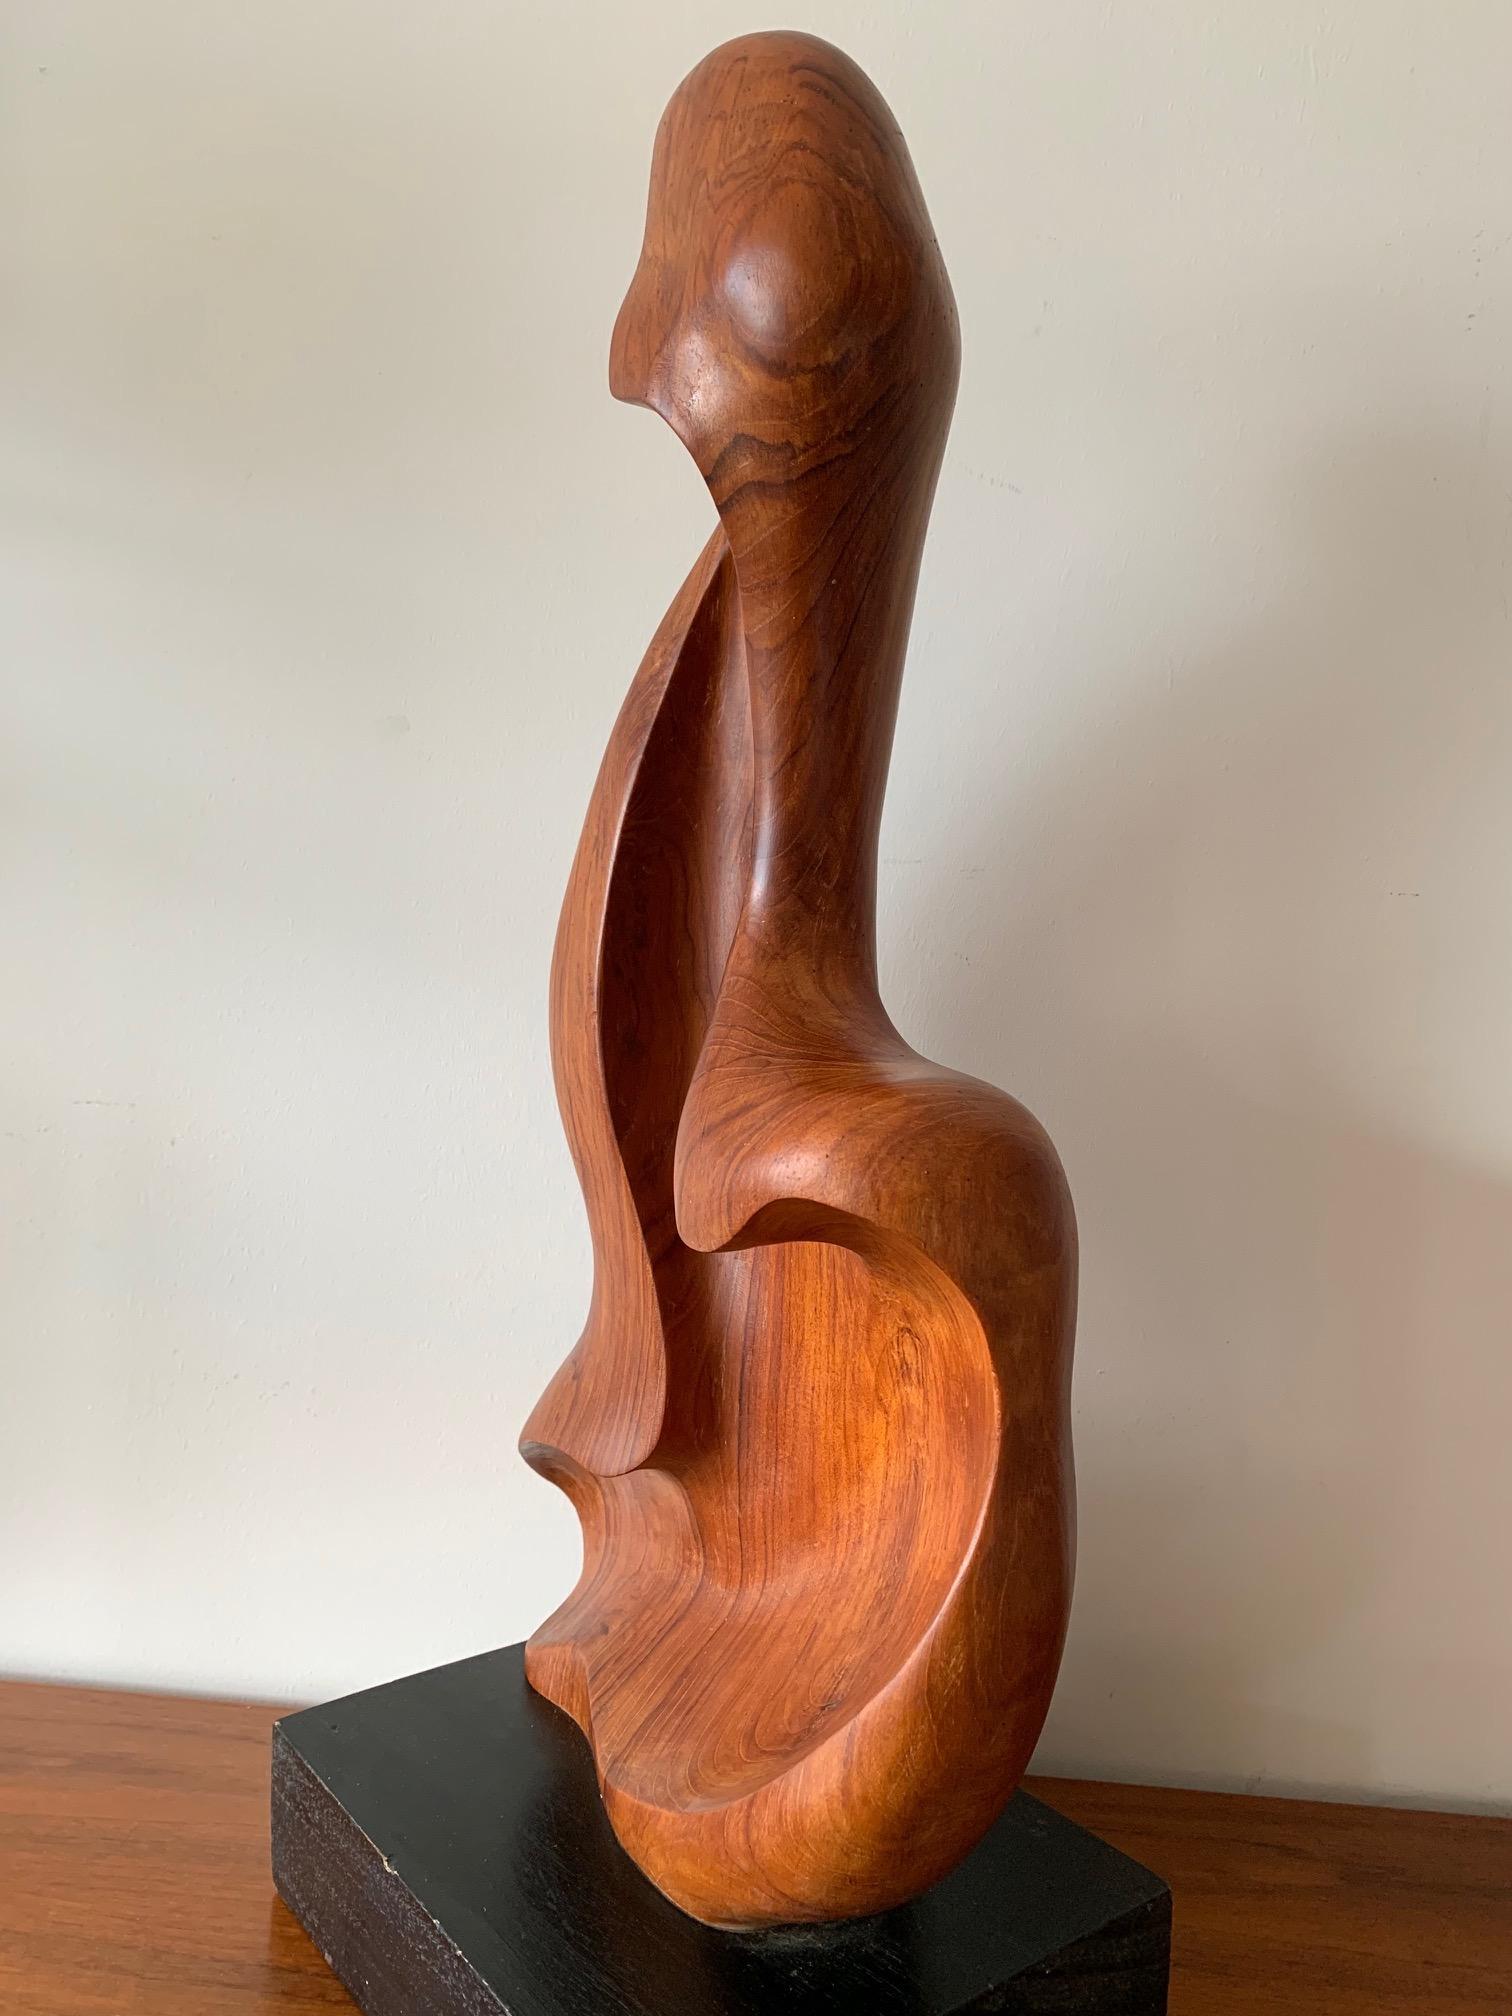 An unusual, sinuous teak wood sculpture, signed Appu. Indian artist, circa 1960s. While abstract the form is clearly derived from female figure.